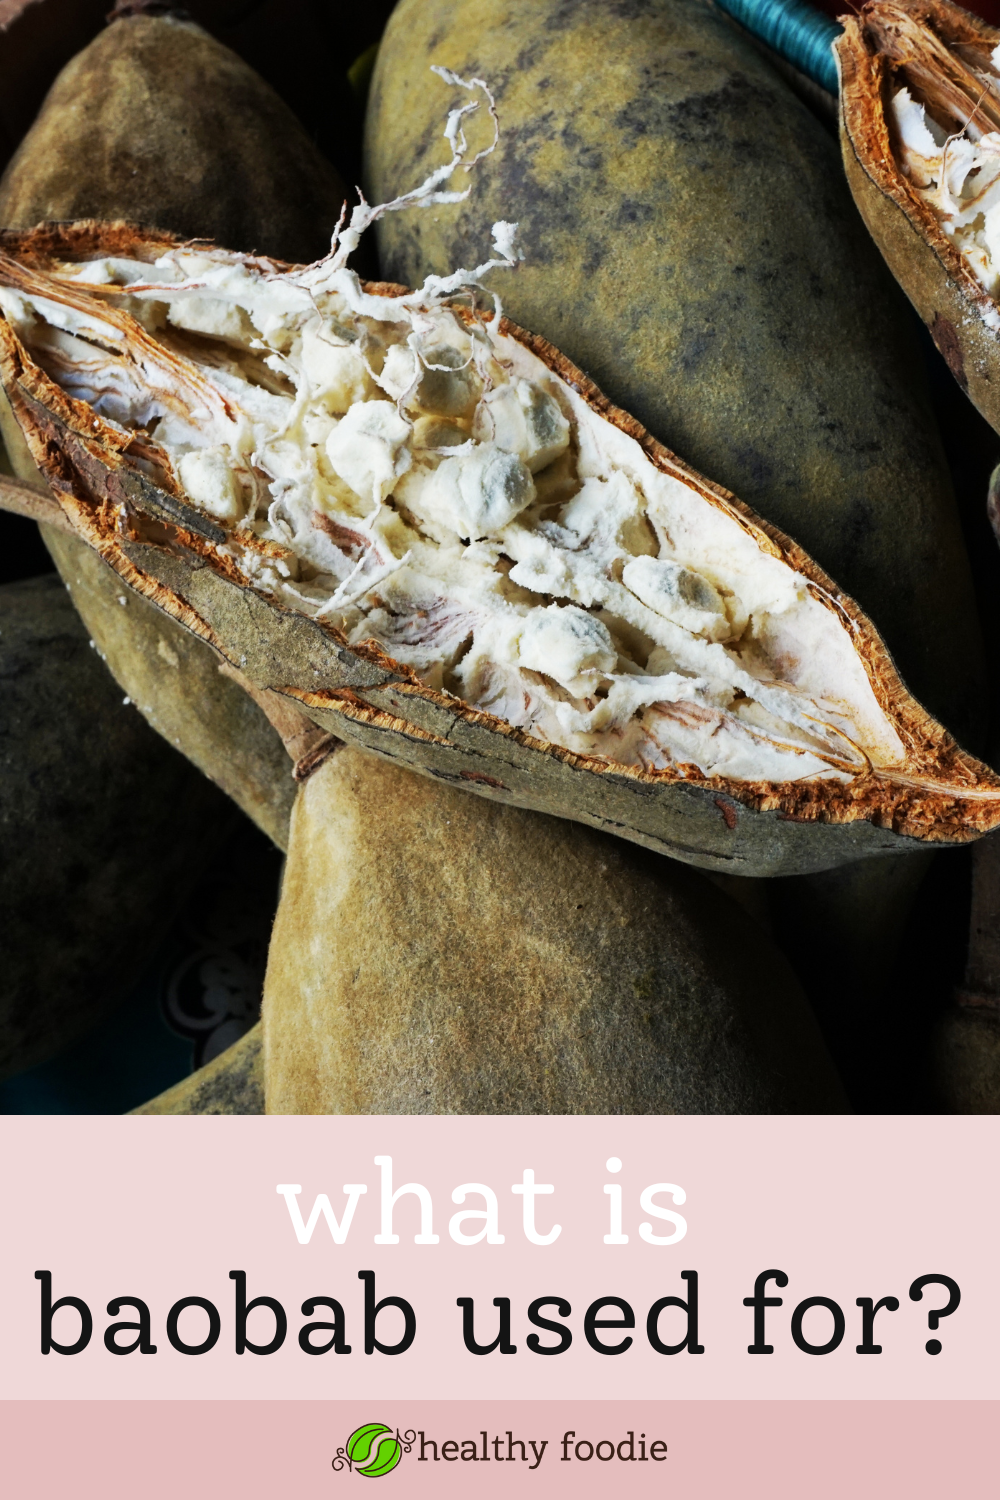 what is baobab used for?